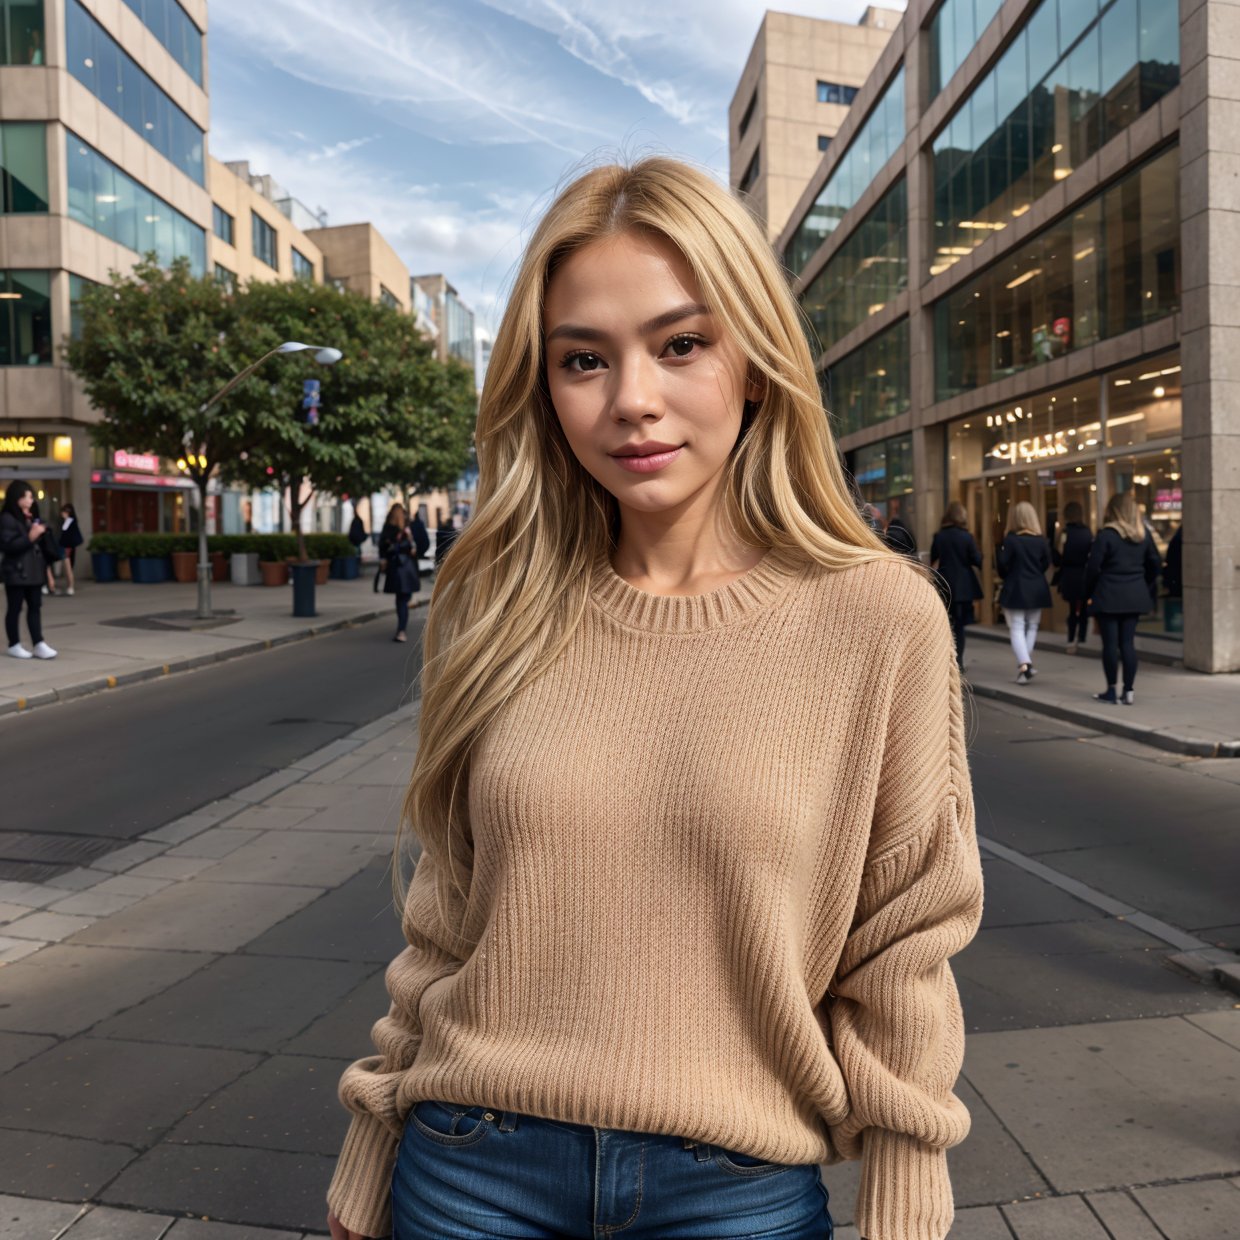 Portrait of a model woman with blond hair in a warm designer sweater, in the style of branded clothing, With the sweater in full view, Panasonic GH5, happy expressions, low key image, sharp texture - Image #2 @SlengSleng, CITY BACKGROUND